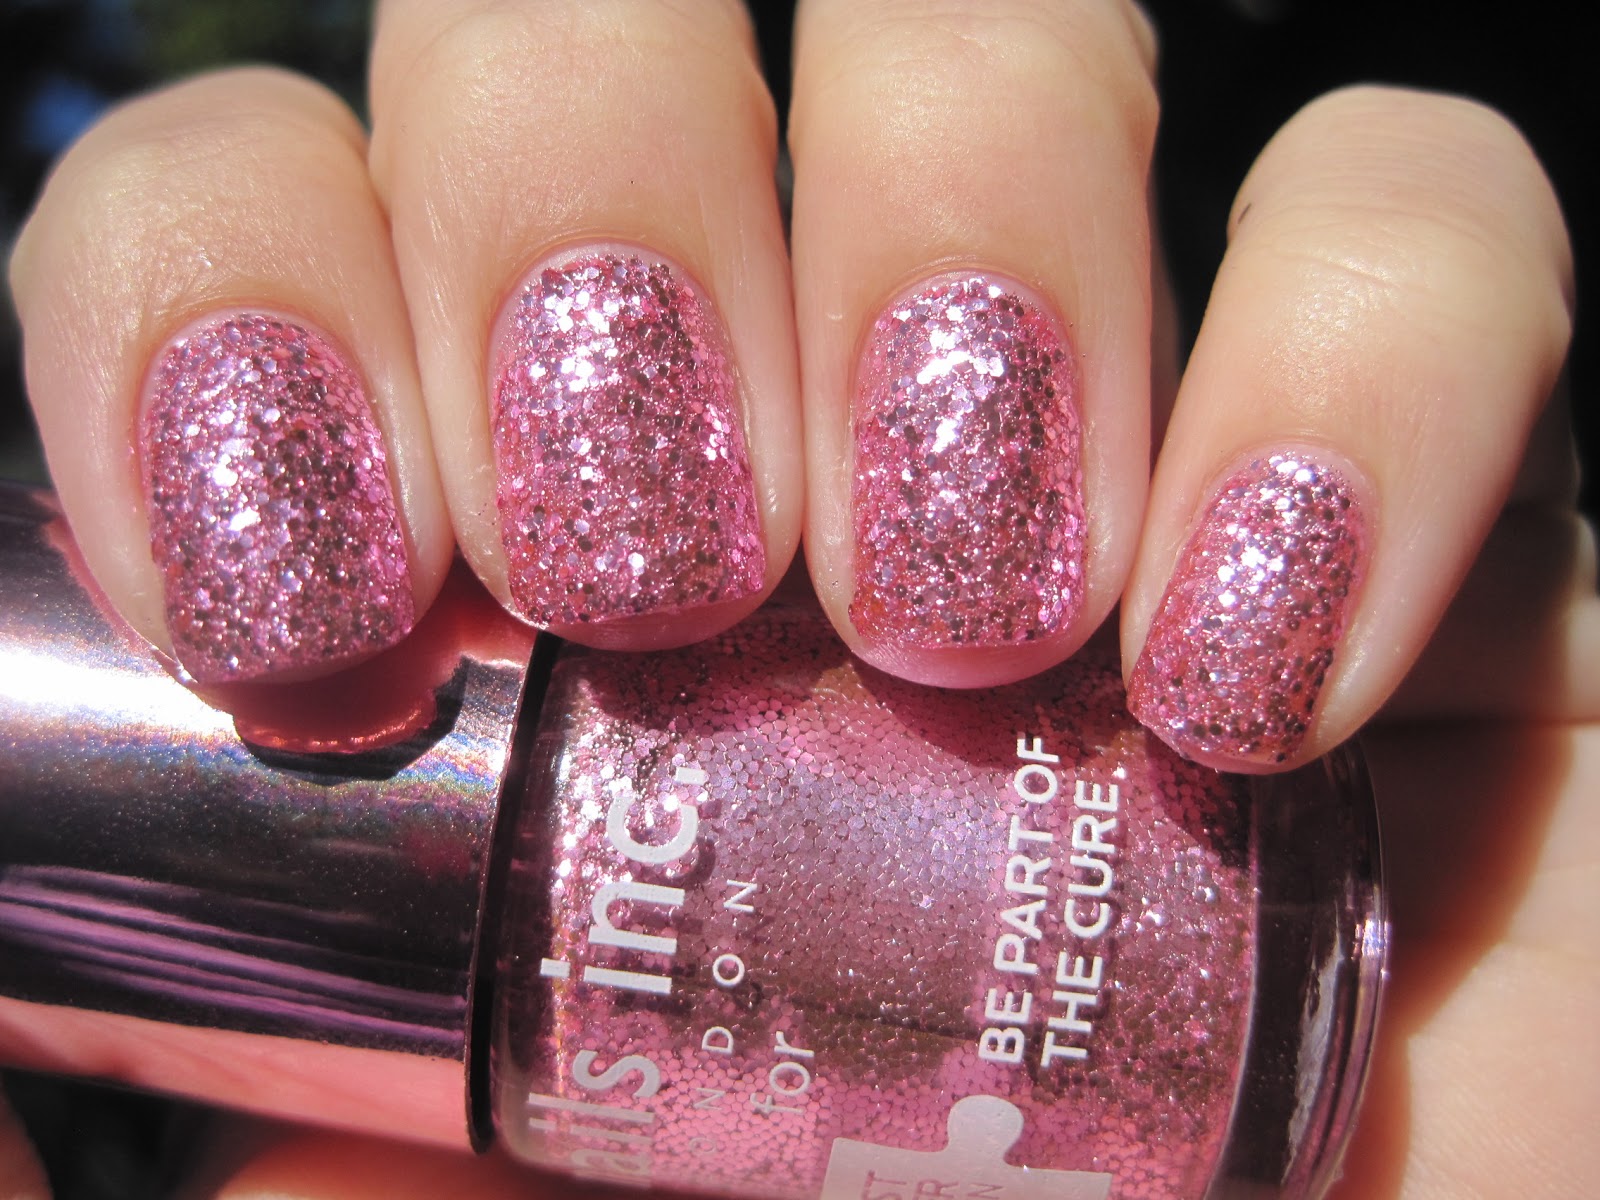 Sparkly Vernis: Nails Inc Pinkie Pink for BCA